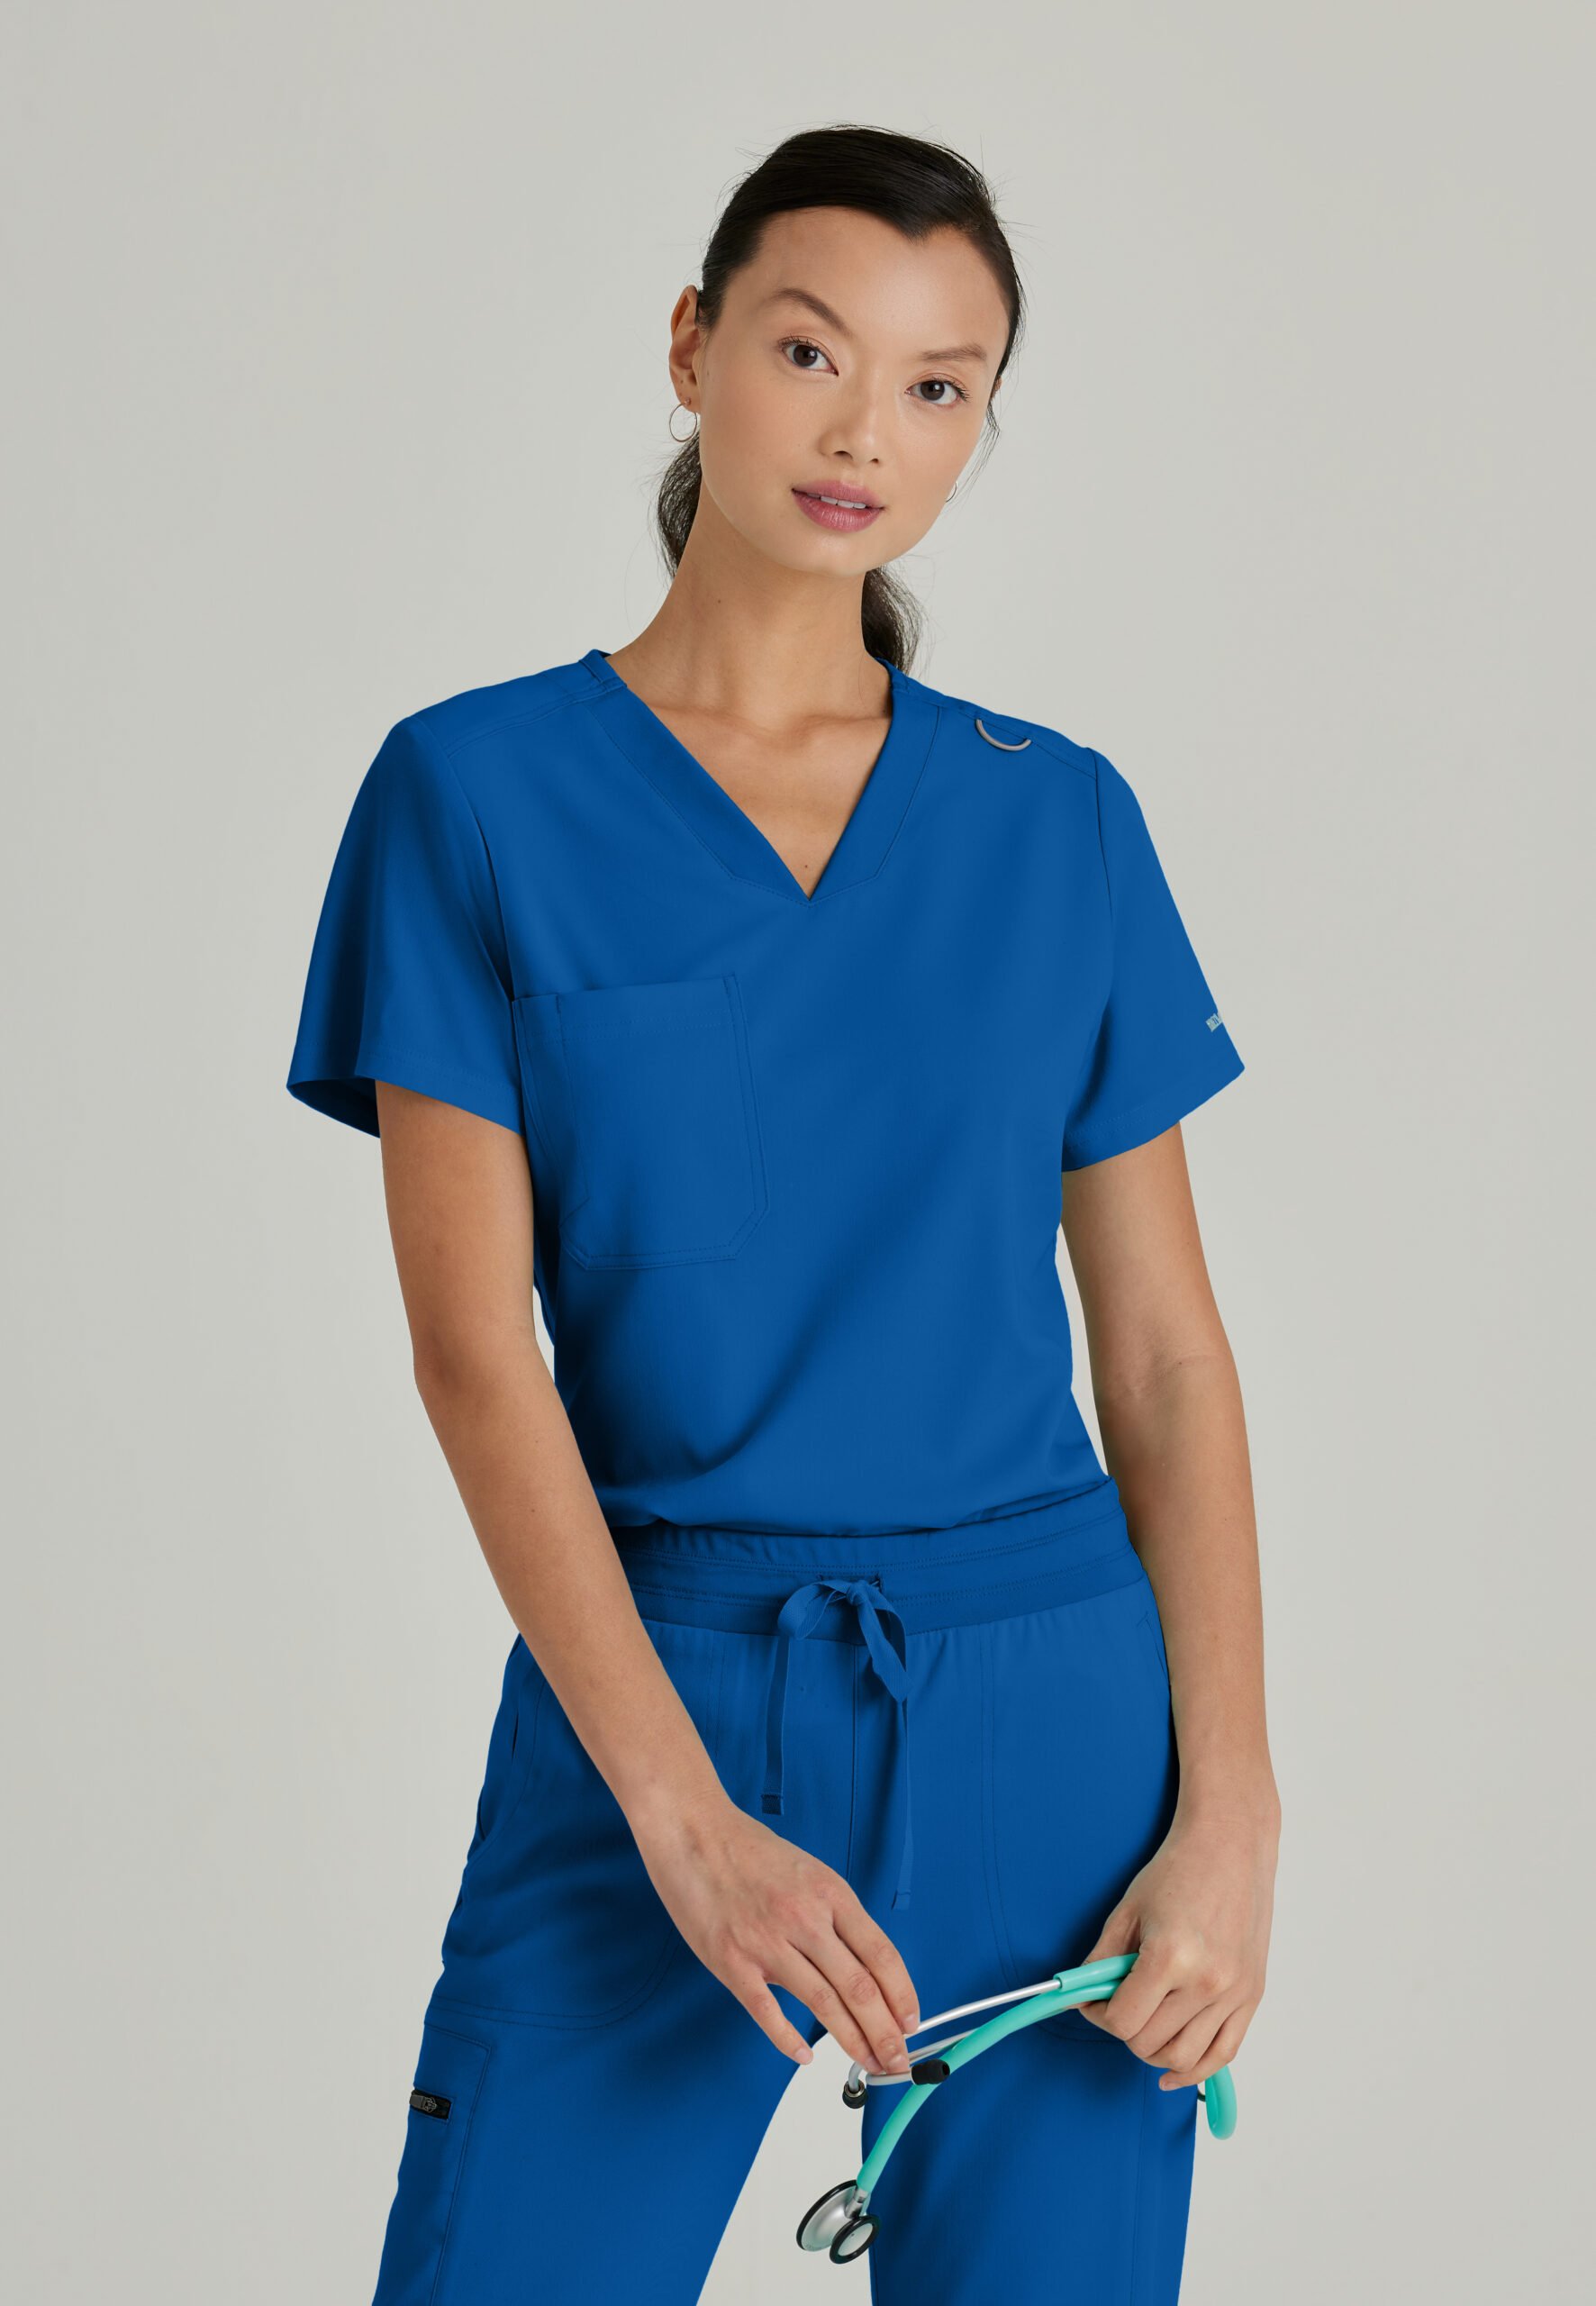 Comfortable and Stylish Black Scrubs for Healthcare Professionals